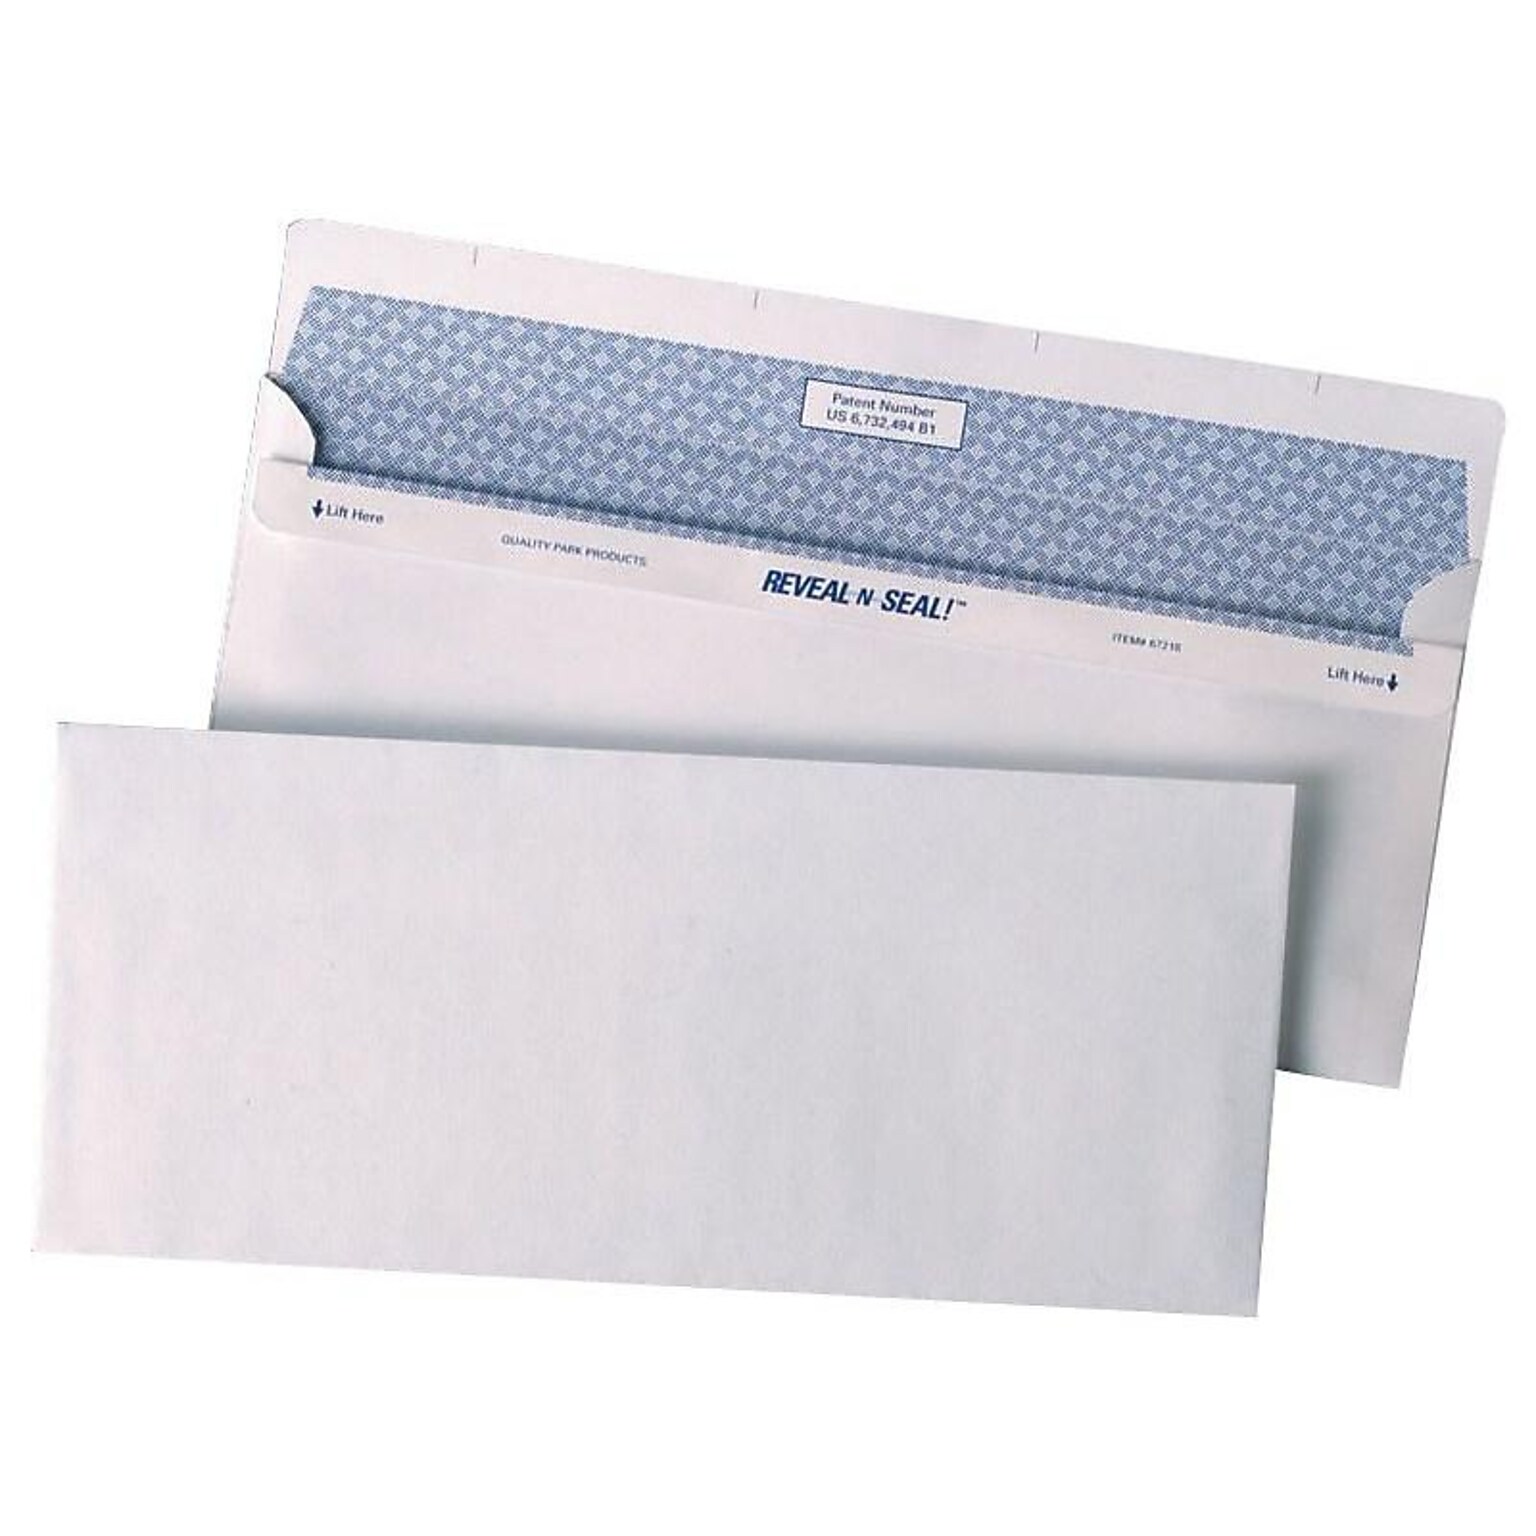 Quality Park Reveal-N-Seal Security Tinted #10 Business Envelopes, 4 1/8 x 9 1/2, White Wove, 500/Box (QUA67218)